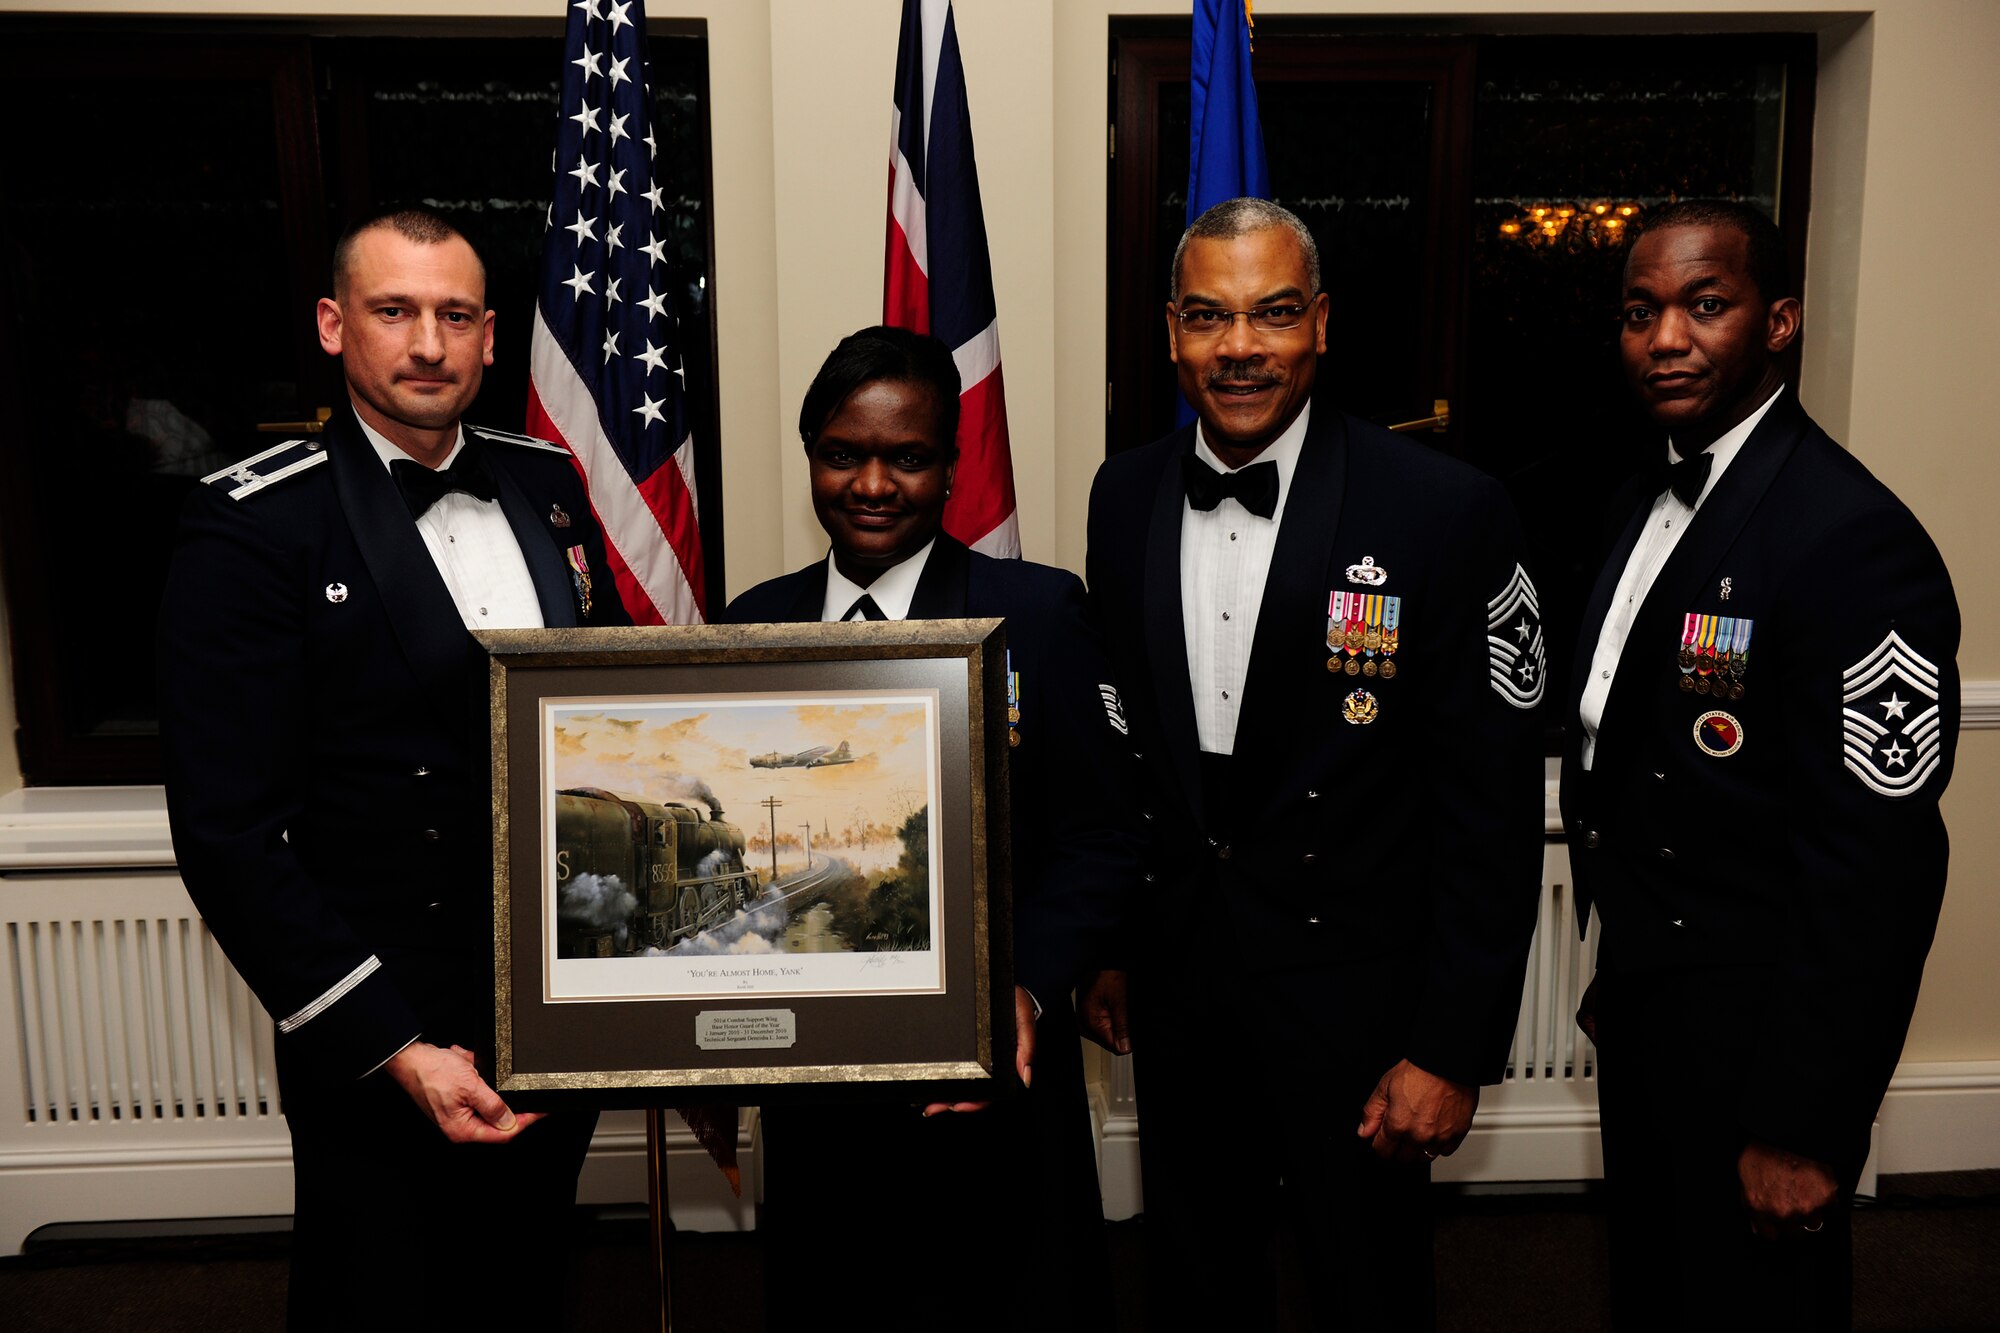 RAF ALCONBURY, United Kingdom - Tech. Sgt. Deneisha Jones accepts the Base Honor Guard of the Year Award during the 501st Combat Support Wing Annual Awards Ceremony Feb. 4 at RAF Alconbury. Sergeant Jones is assigned to the 423rd Civil Engineer Squadron. (U.S. Air Force photo by Tech. Sgt. John Barton)